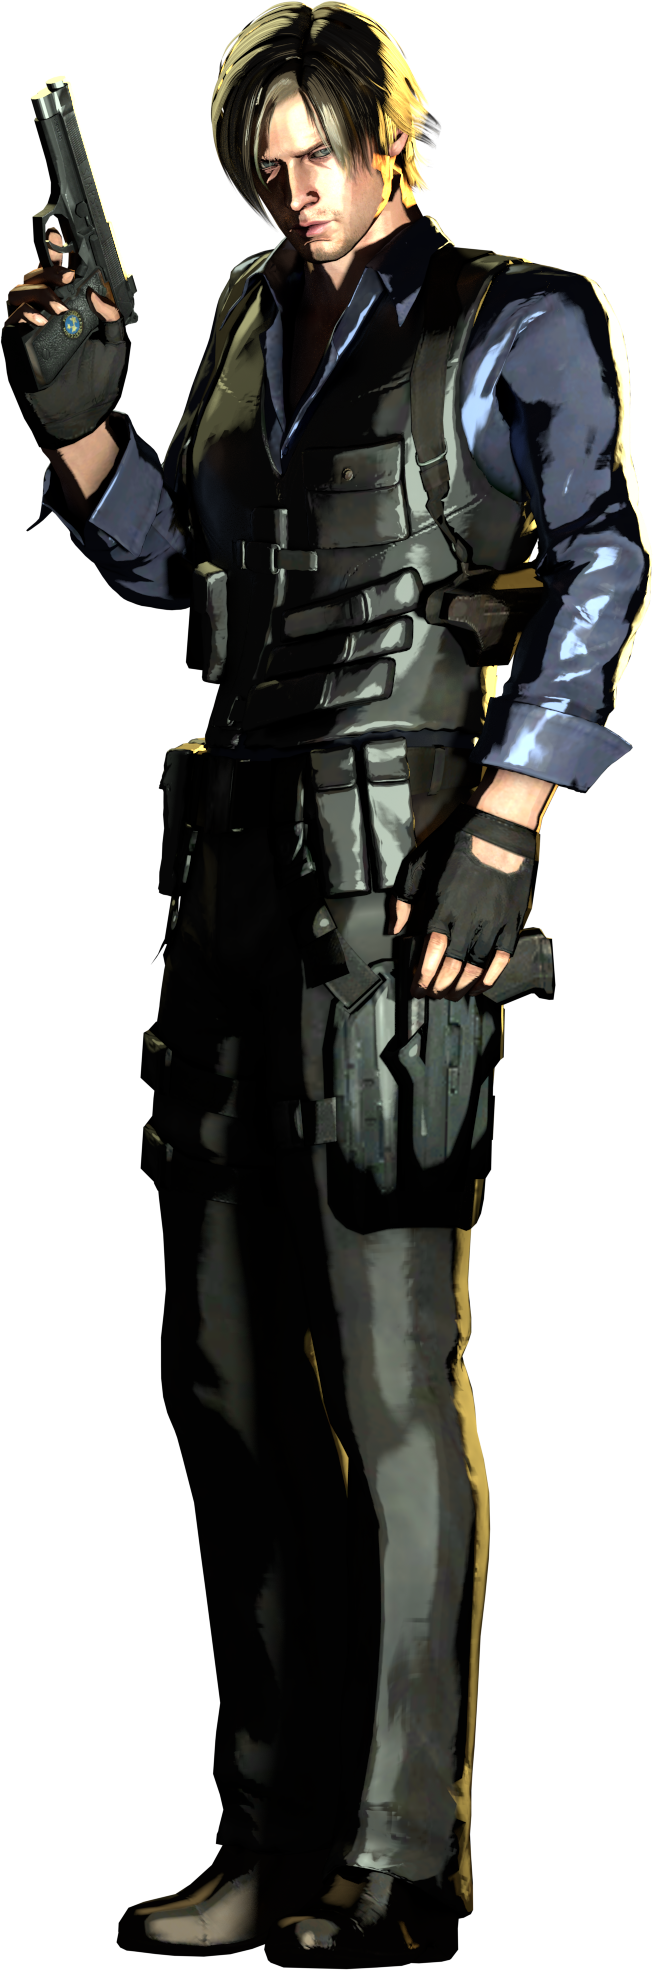 Leon S. Kennedy PNG Image Transparent